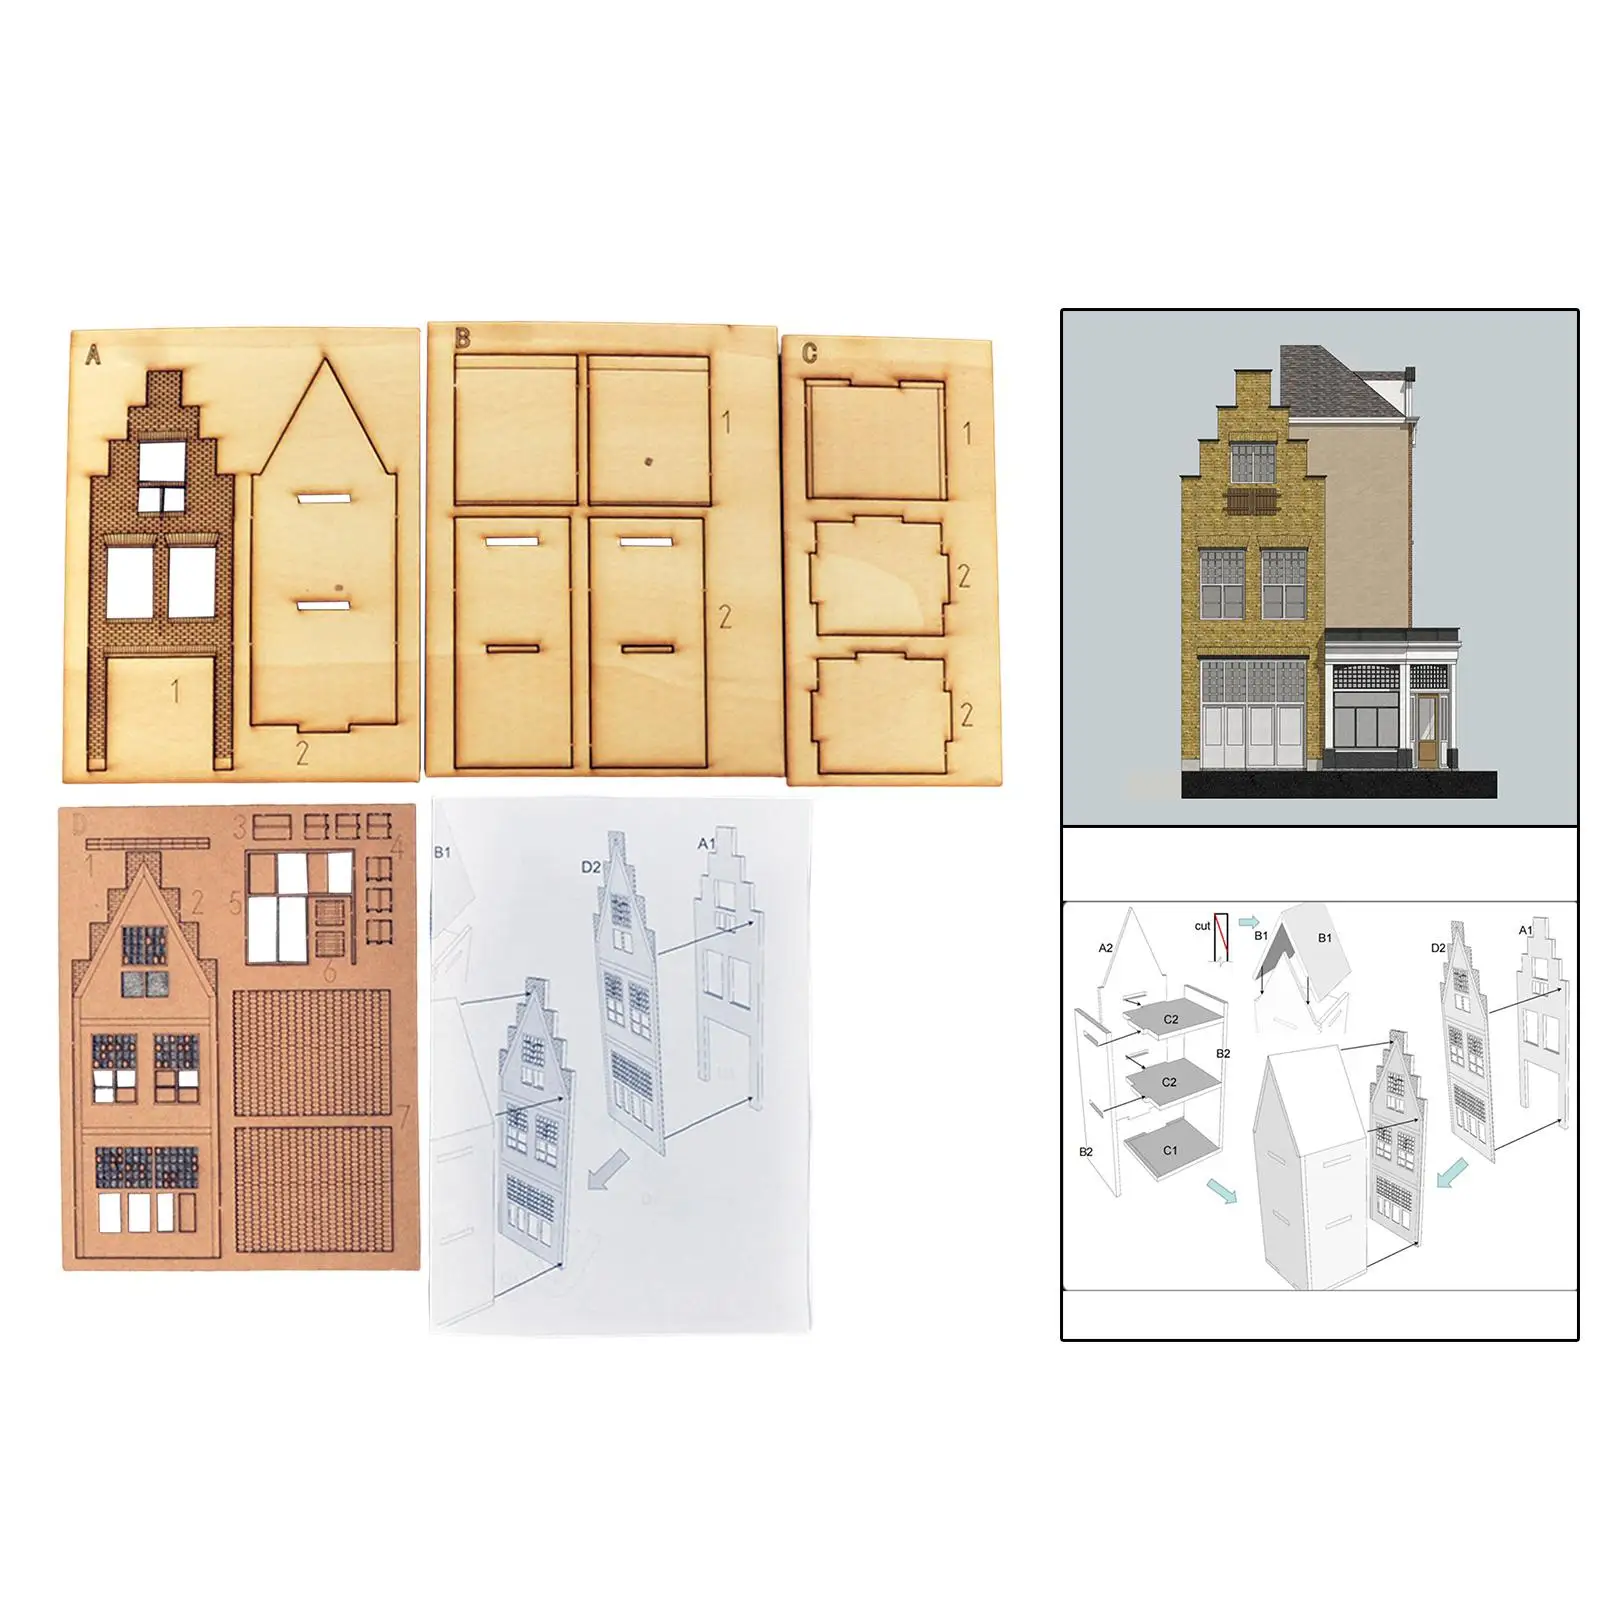 1/87 Model Building Set 3D Handmade Unpainted Puzzles Toy European Style House for Architecture Model Railroad Scenery Diorama